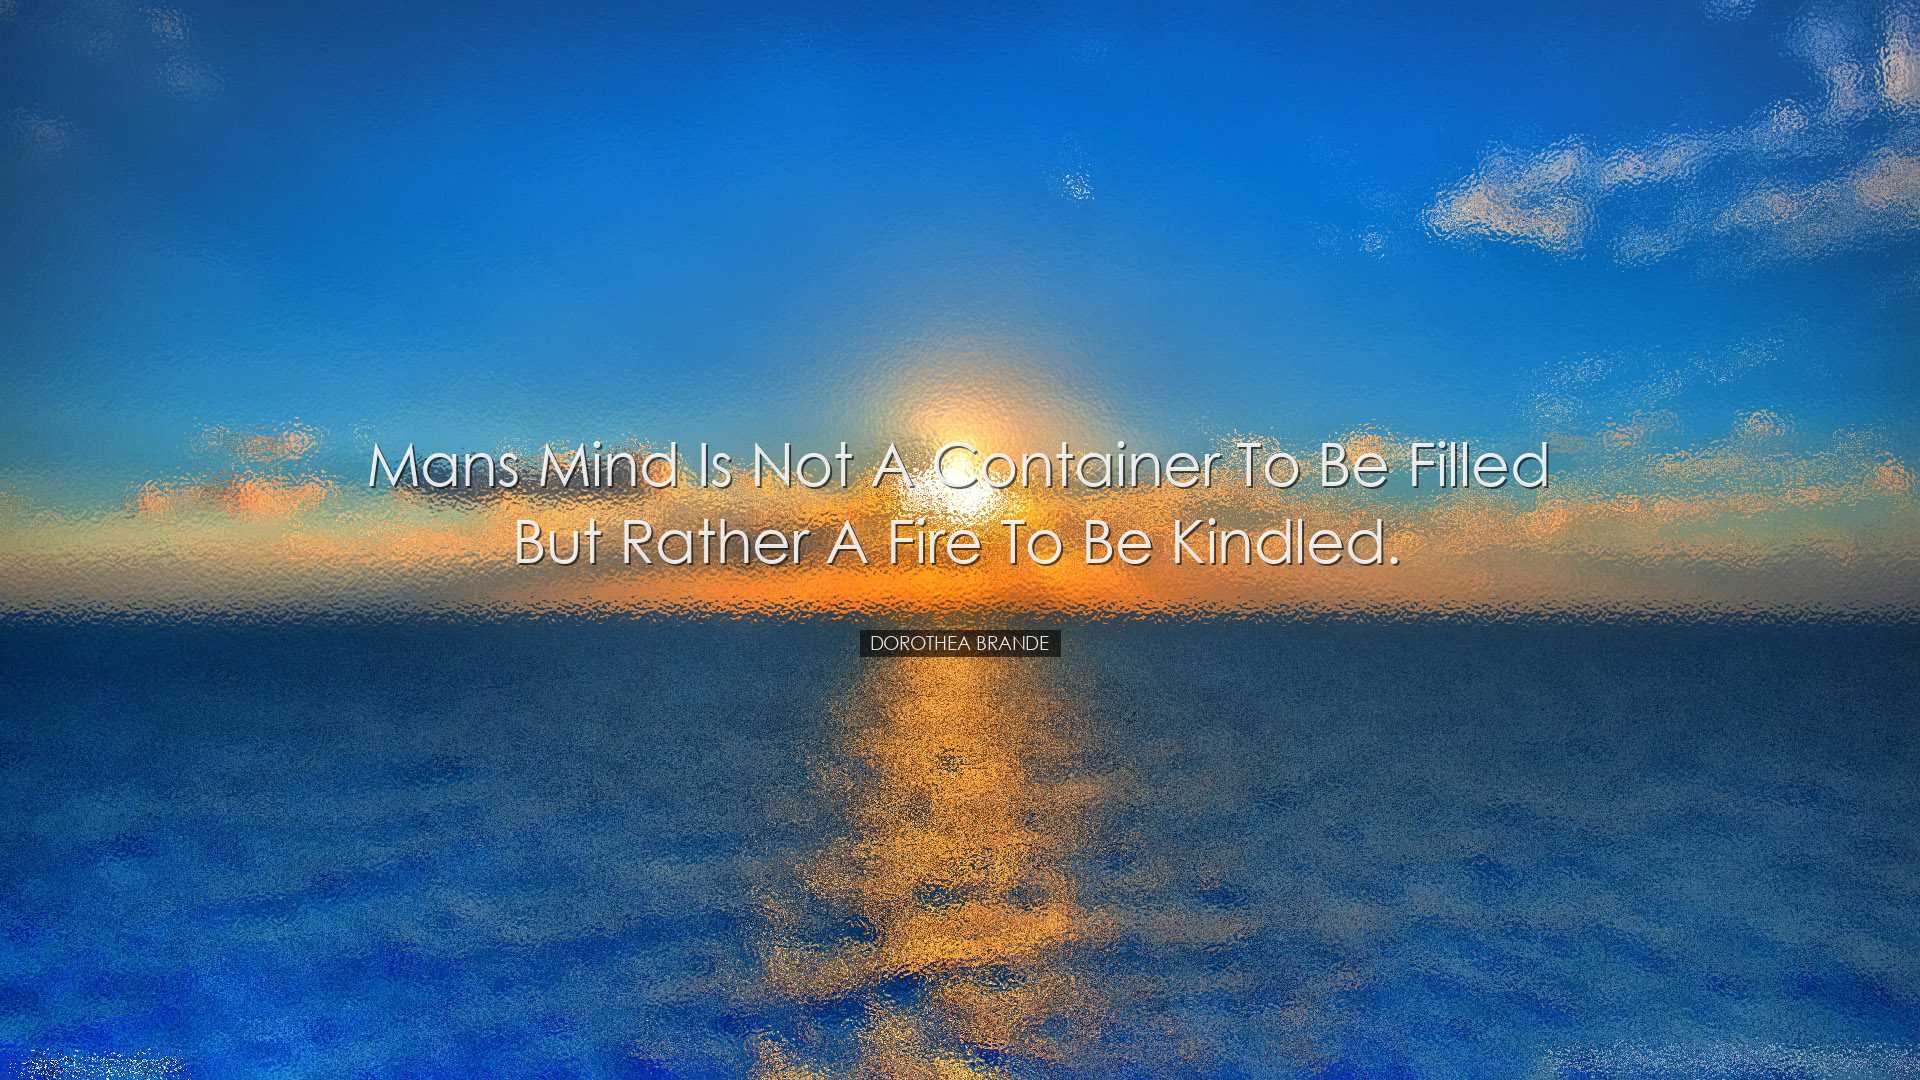 Mans mind is not a container to be filled but rather a fire to be